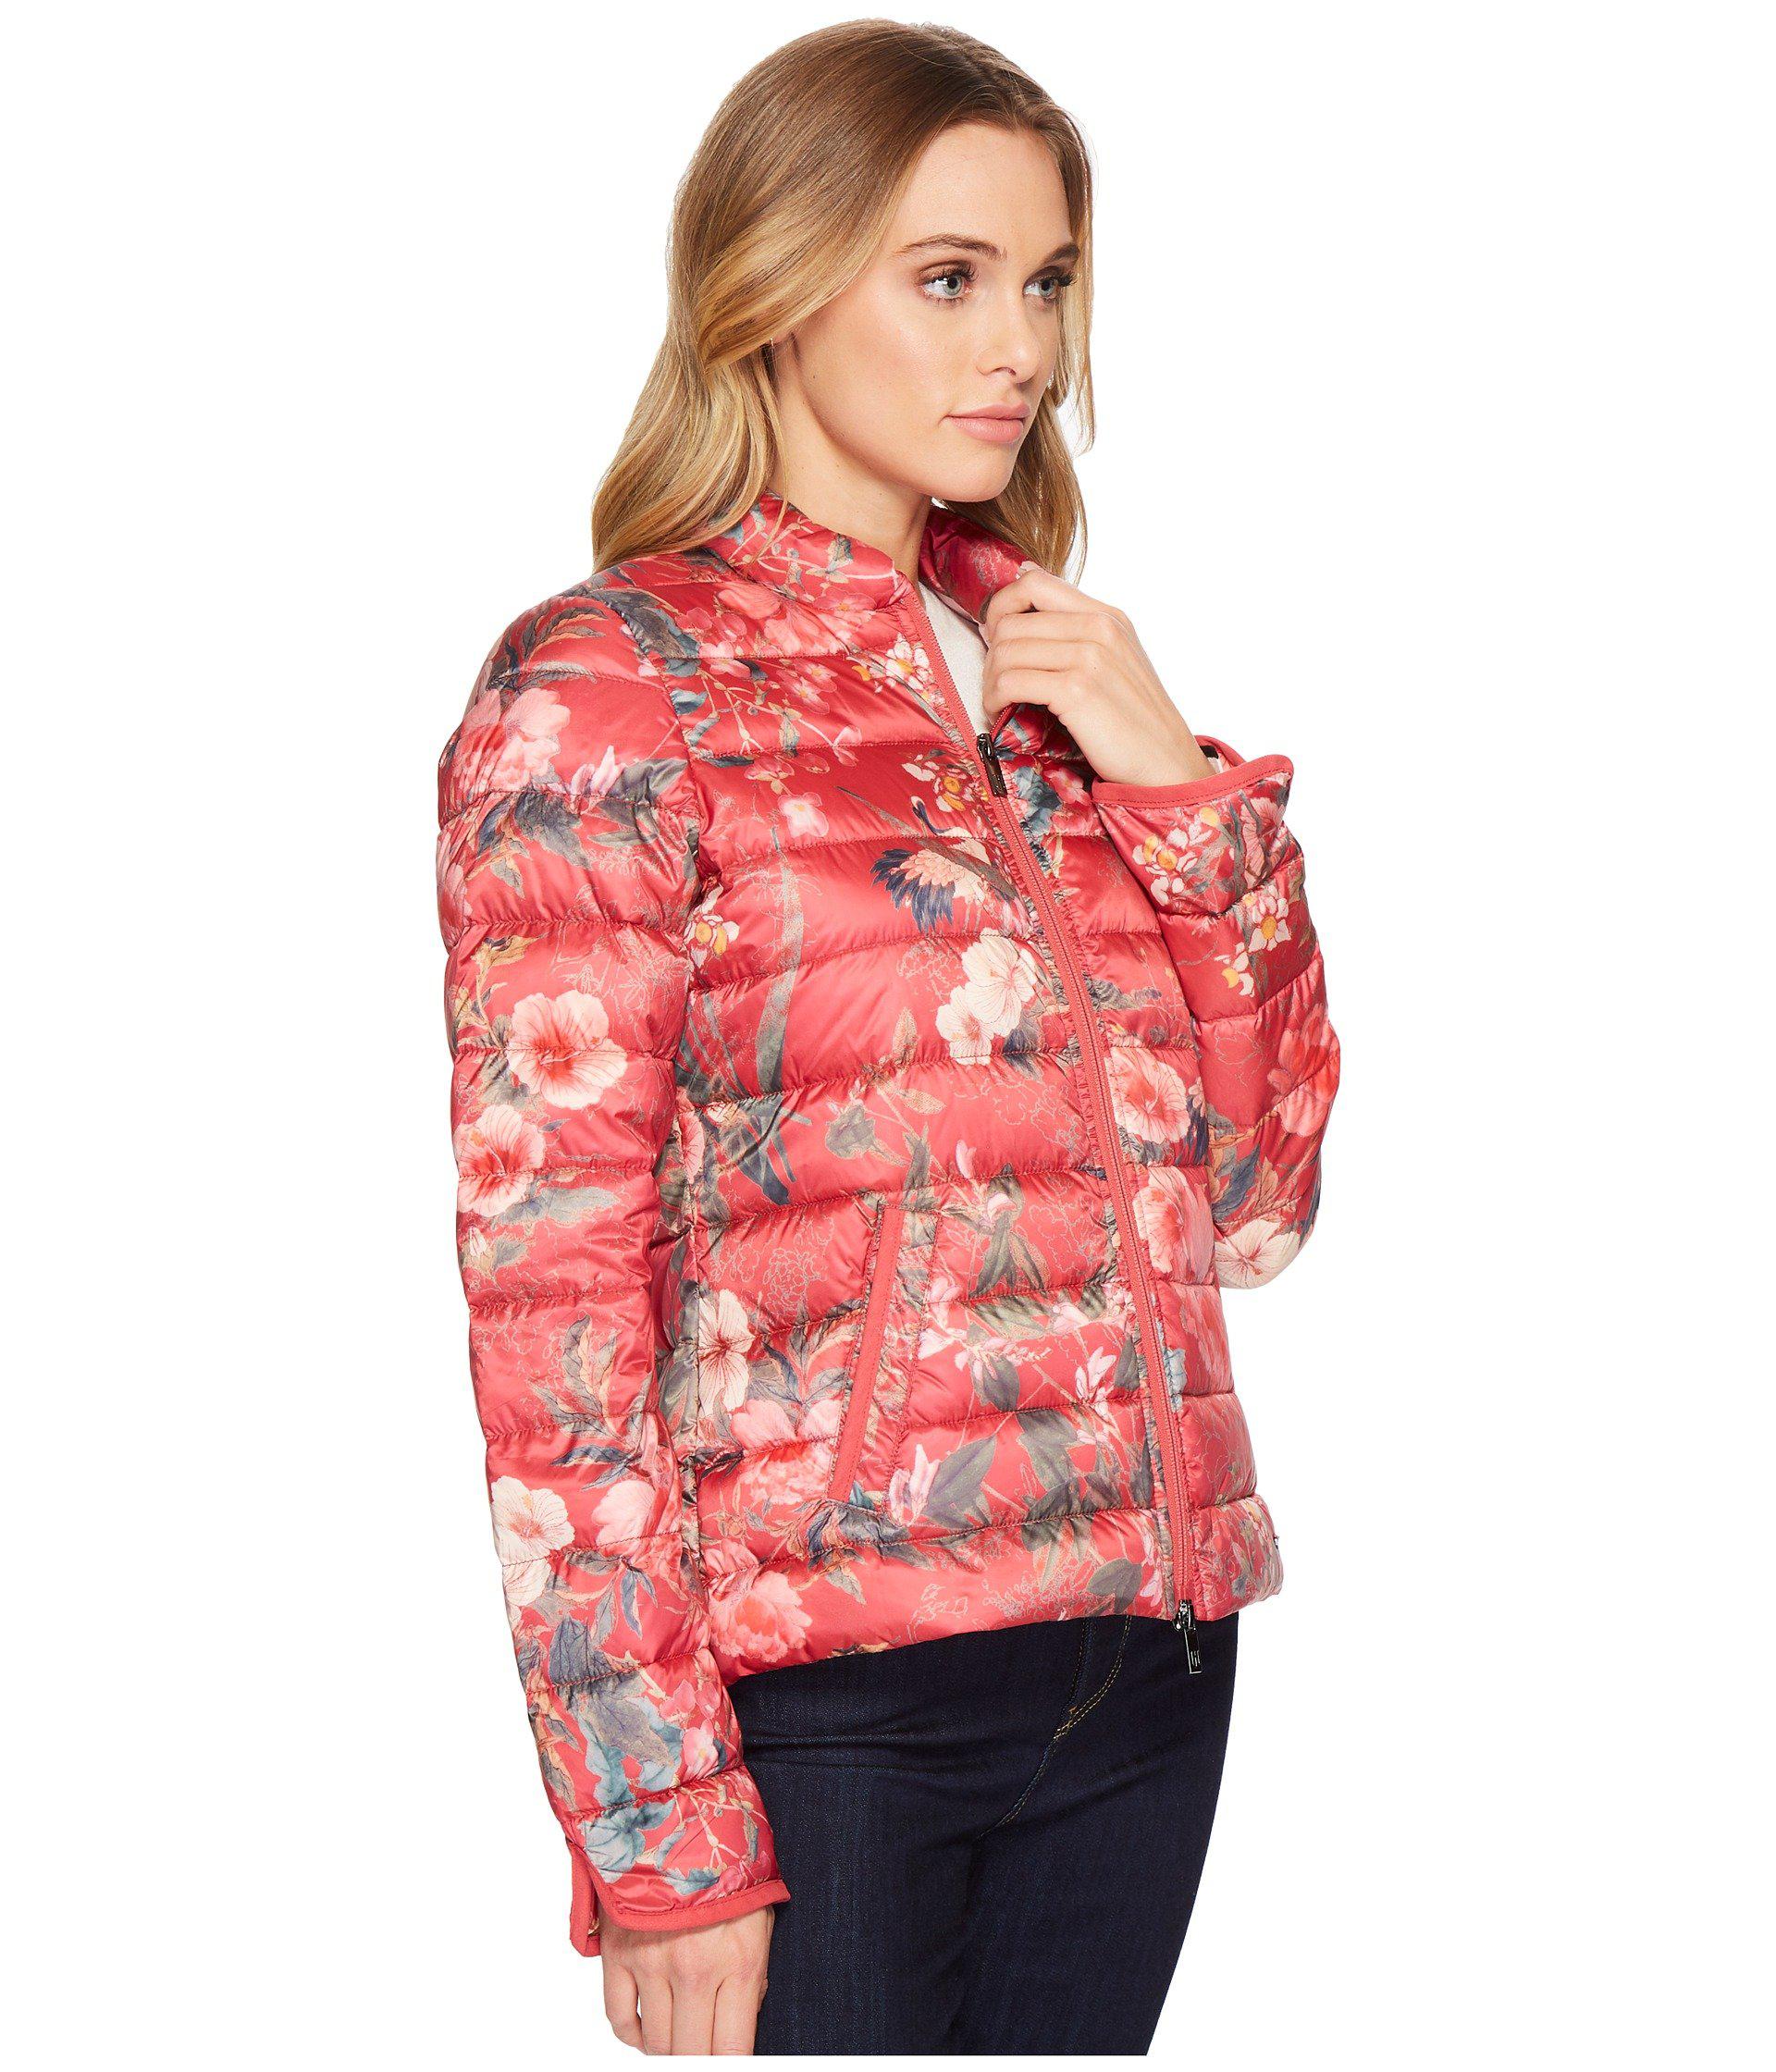 Ilse Jacobsen Printed Puffer Coat in Pink | Lyst